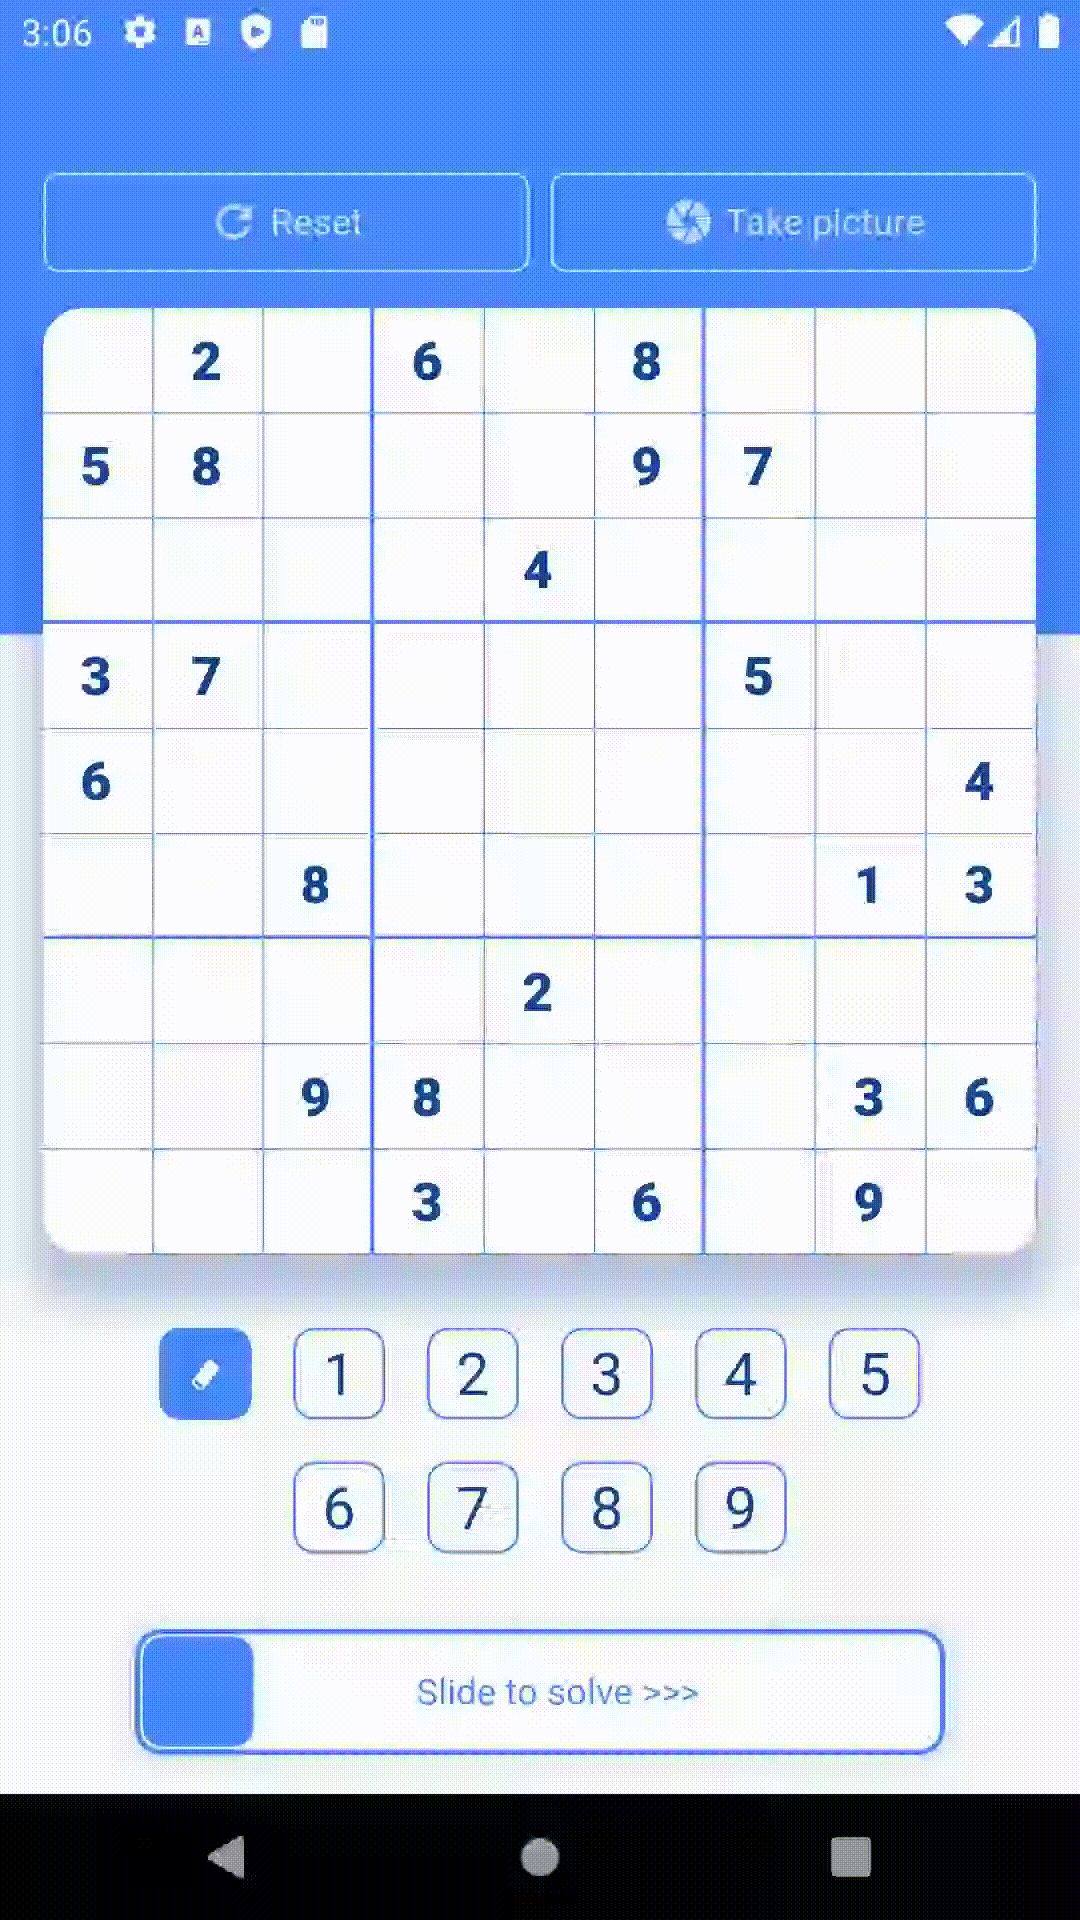 A simple Flutter application to get the solution to Sudoku puzzles